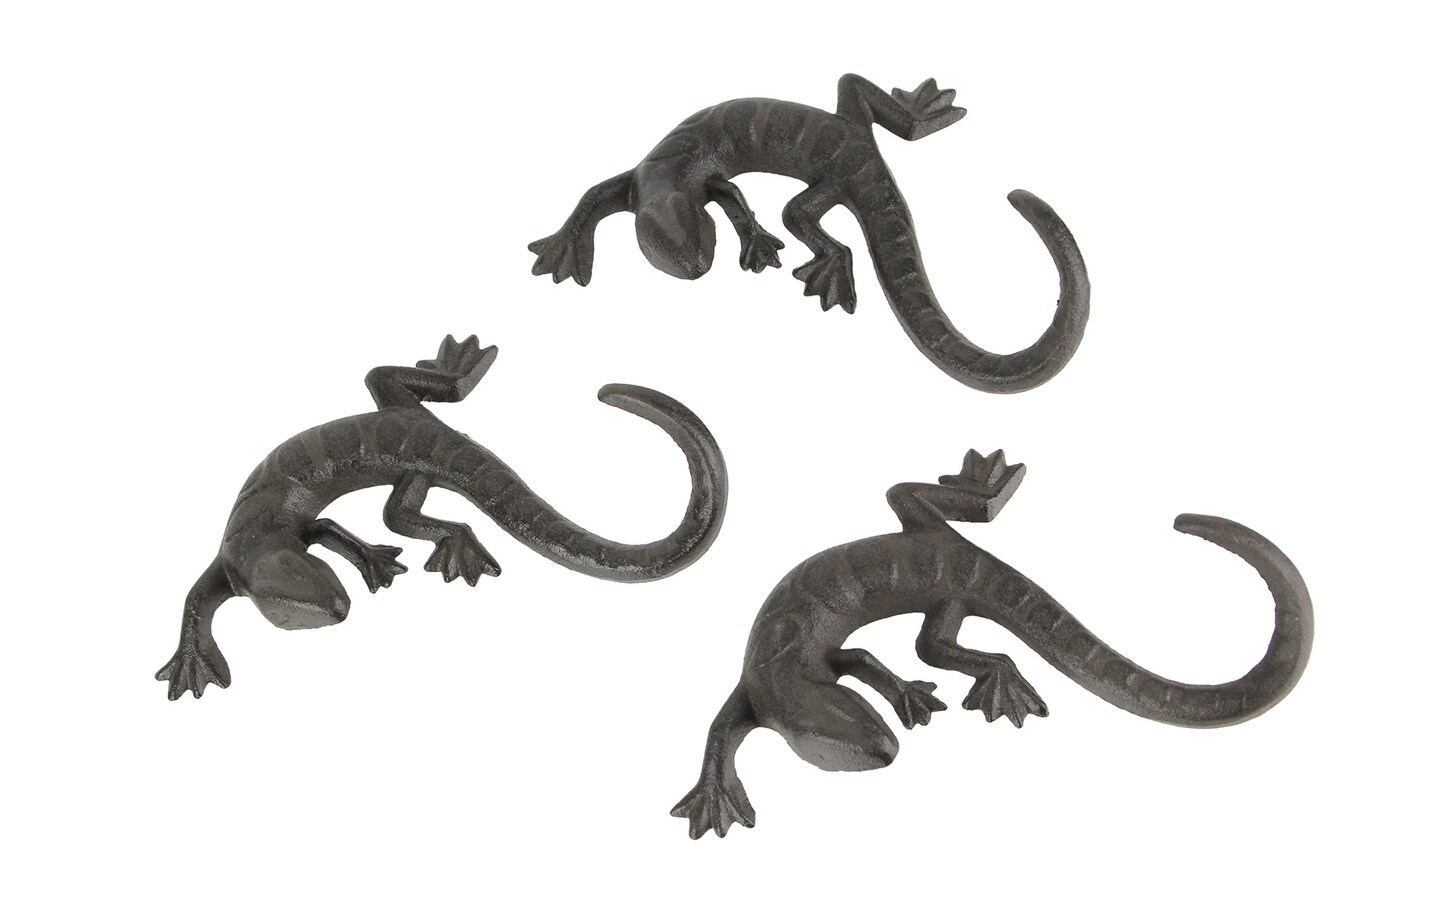 Set of 3 Rustic Cast Iron Lizard Decorative Wall Hanging Tail Hooks Home Decor